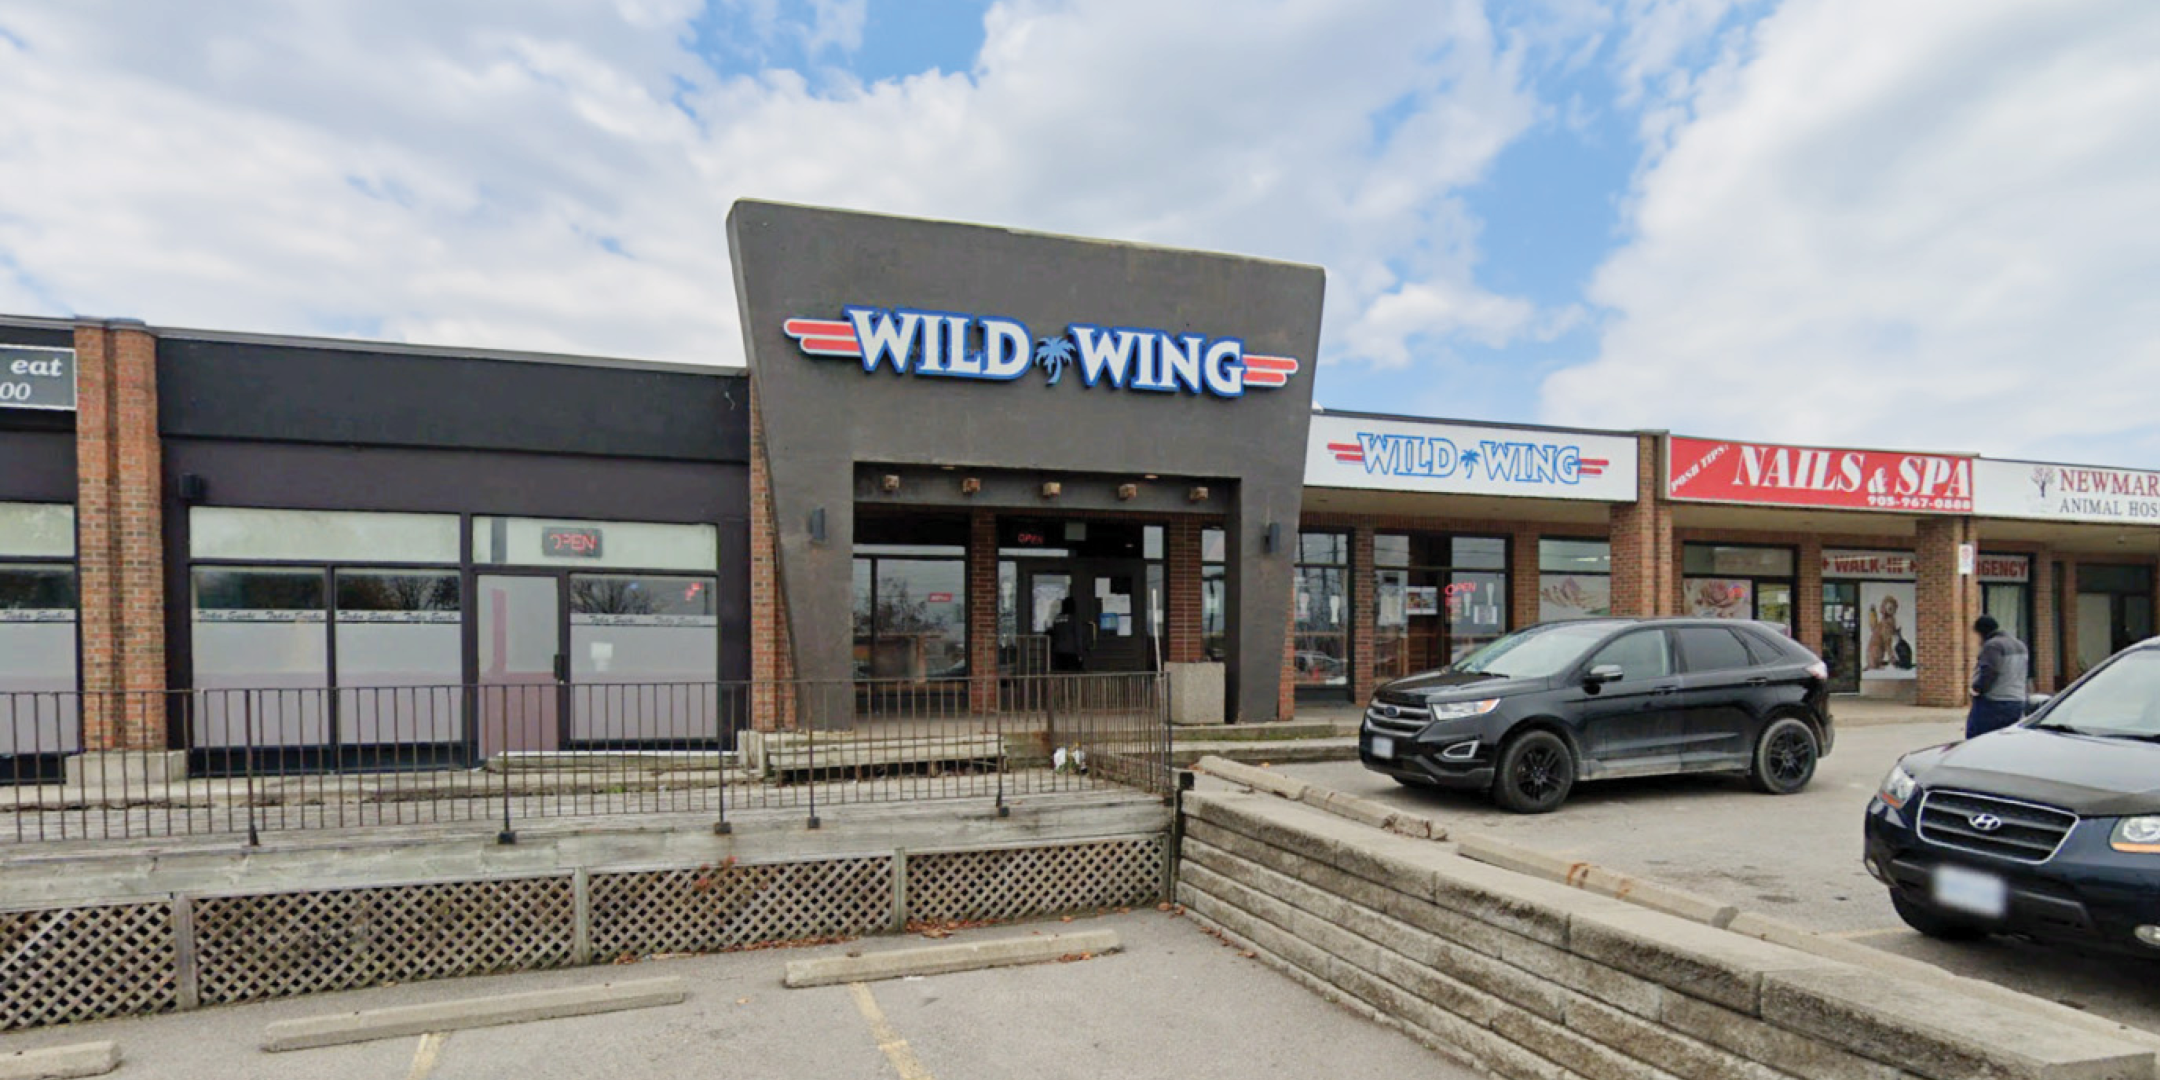 340 Eagle Street W Wild Wing Restaurant Building in Plaza